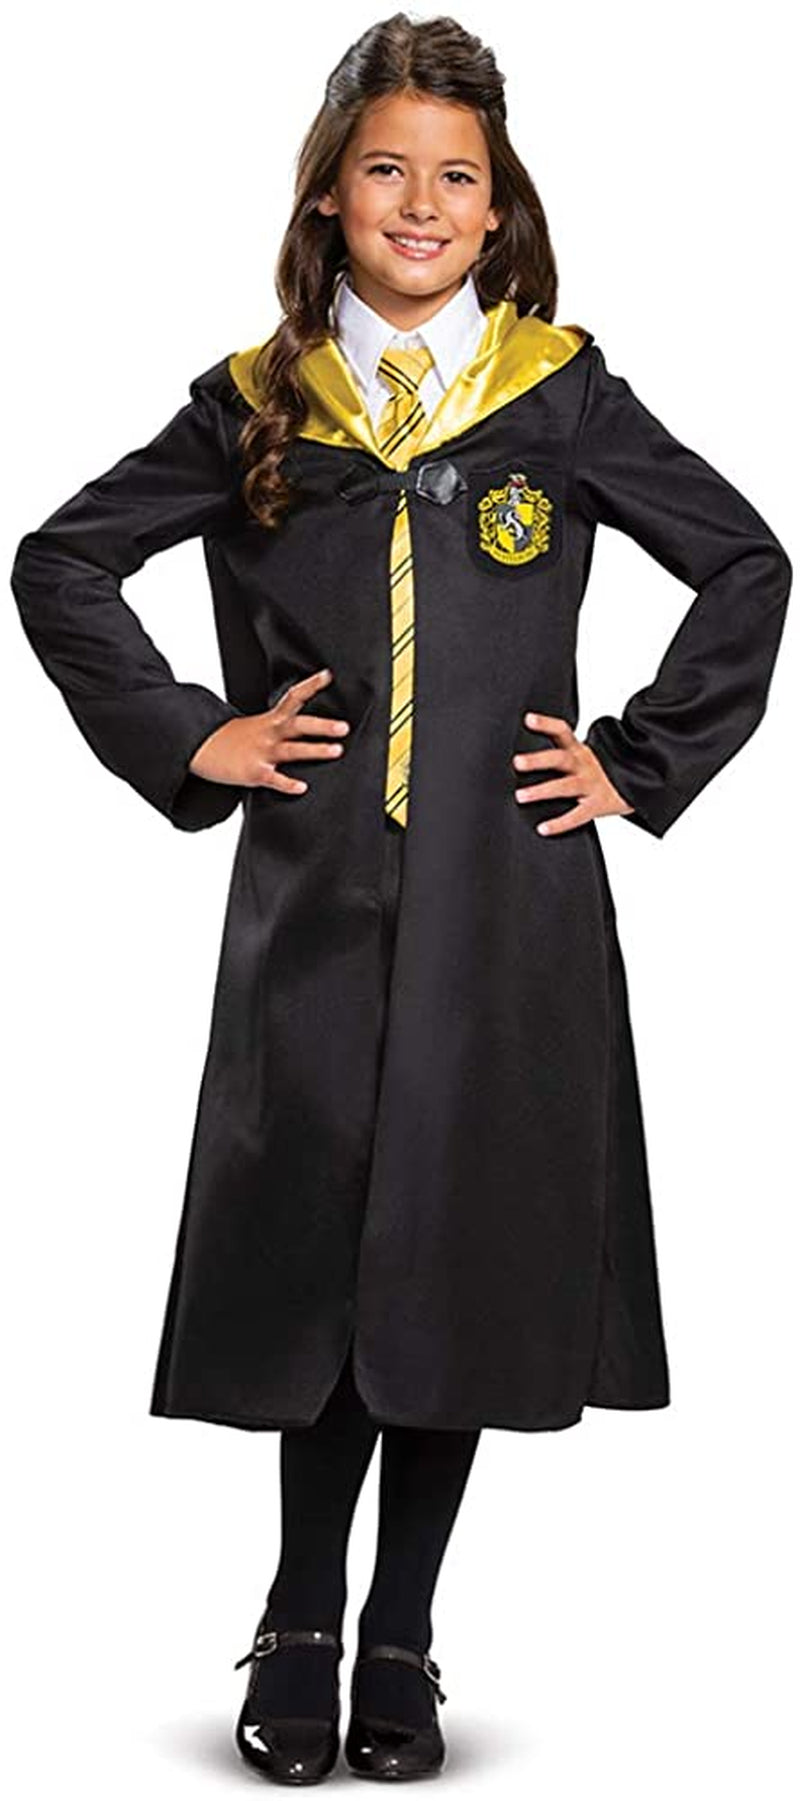 Harry Potter Robe, Official Hogwarts Wizarding World Costume Robes, Classic Kids Size Dress up Accessory